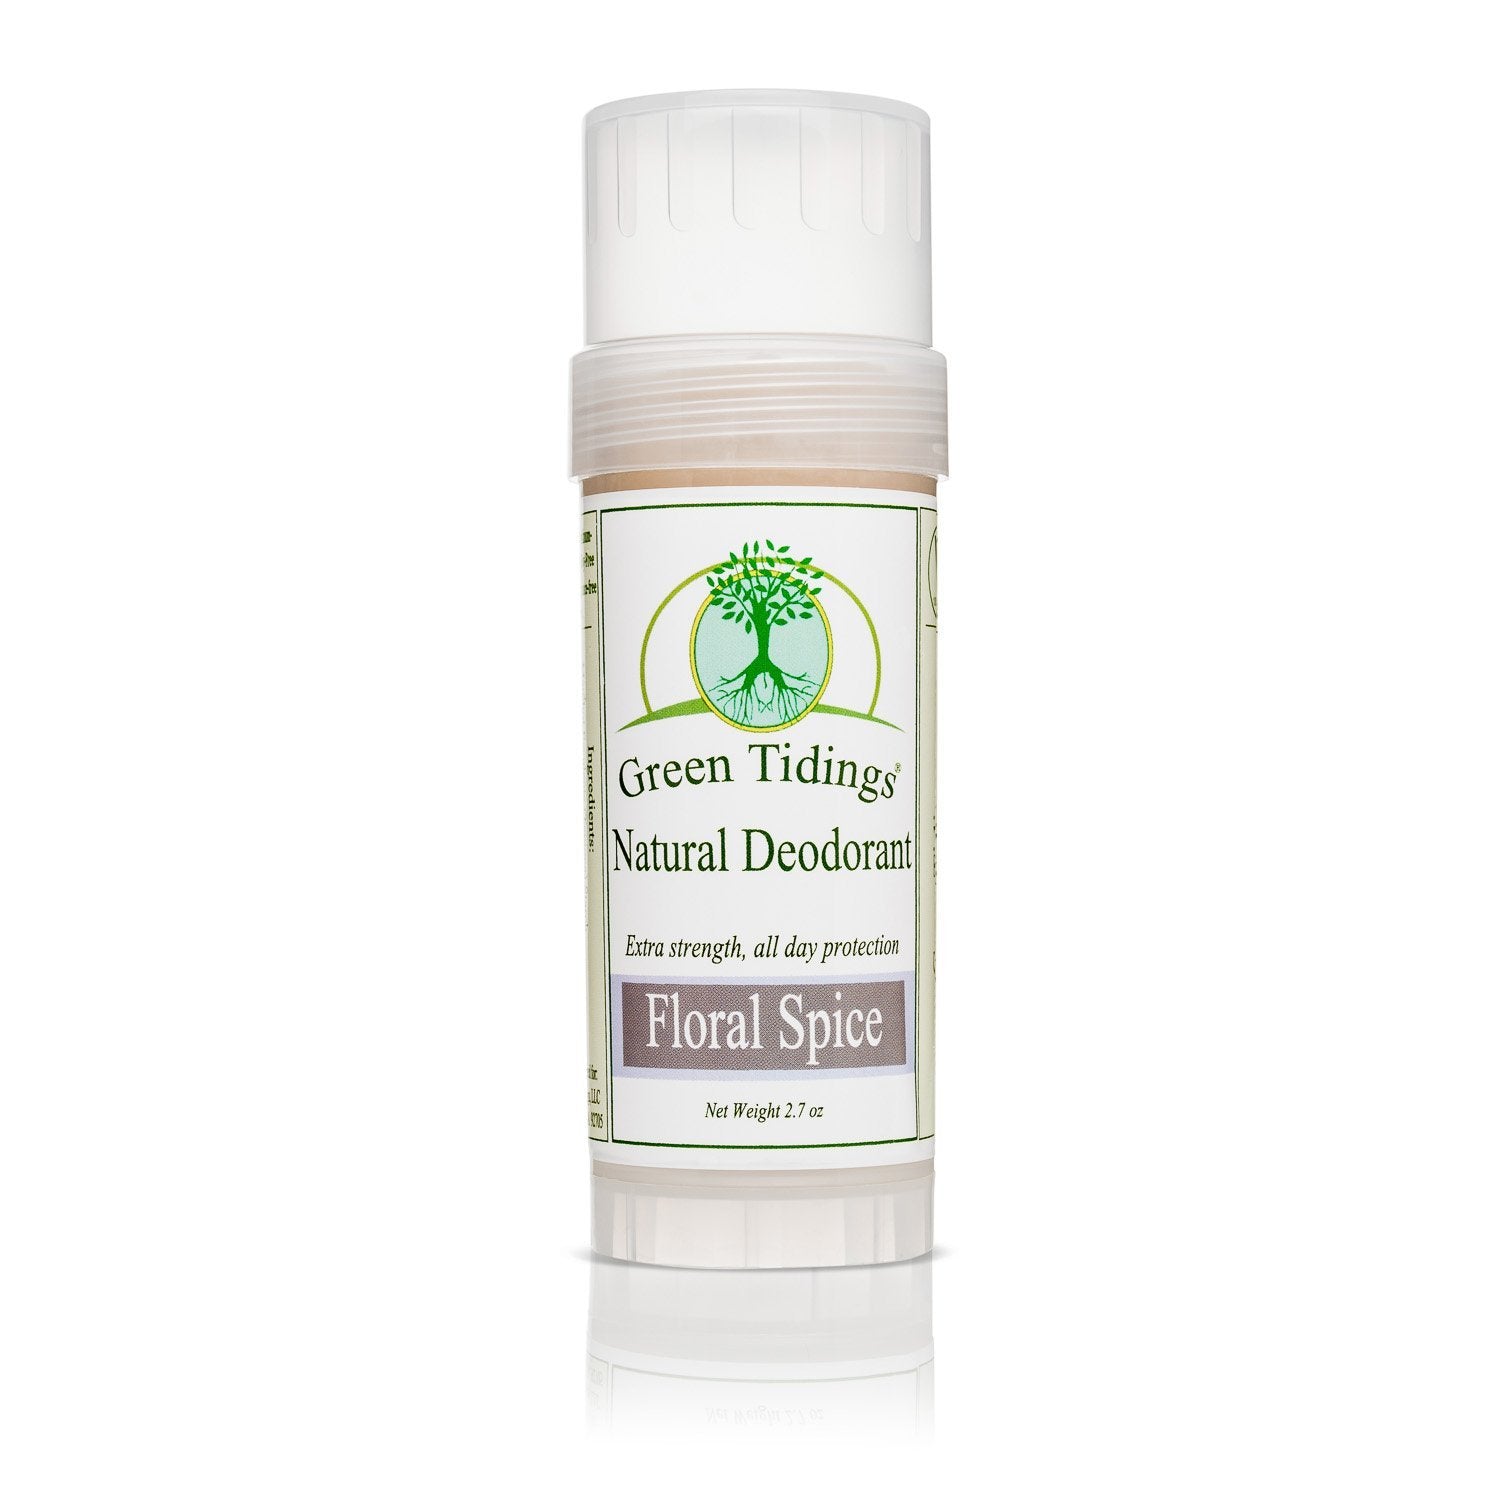 Green Tidings All Natural Deodorant- Floral Spice, 2.7 Ounces - Green Tidings